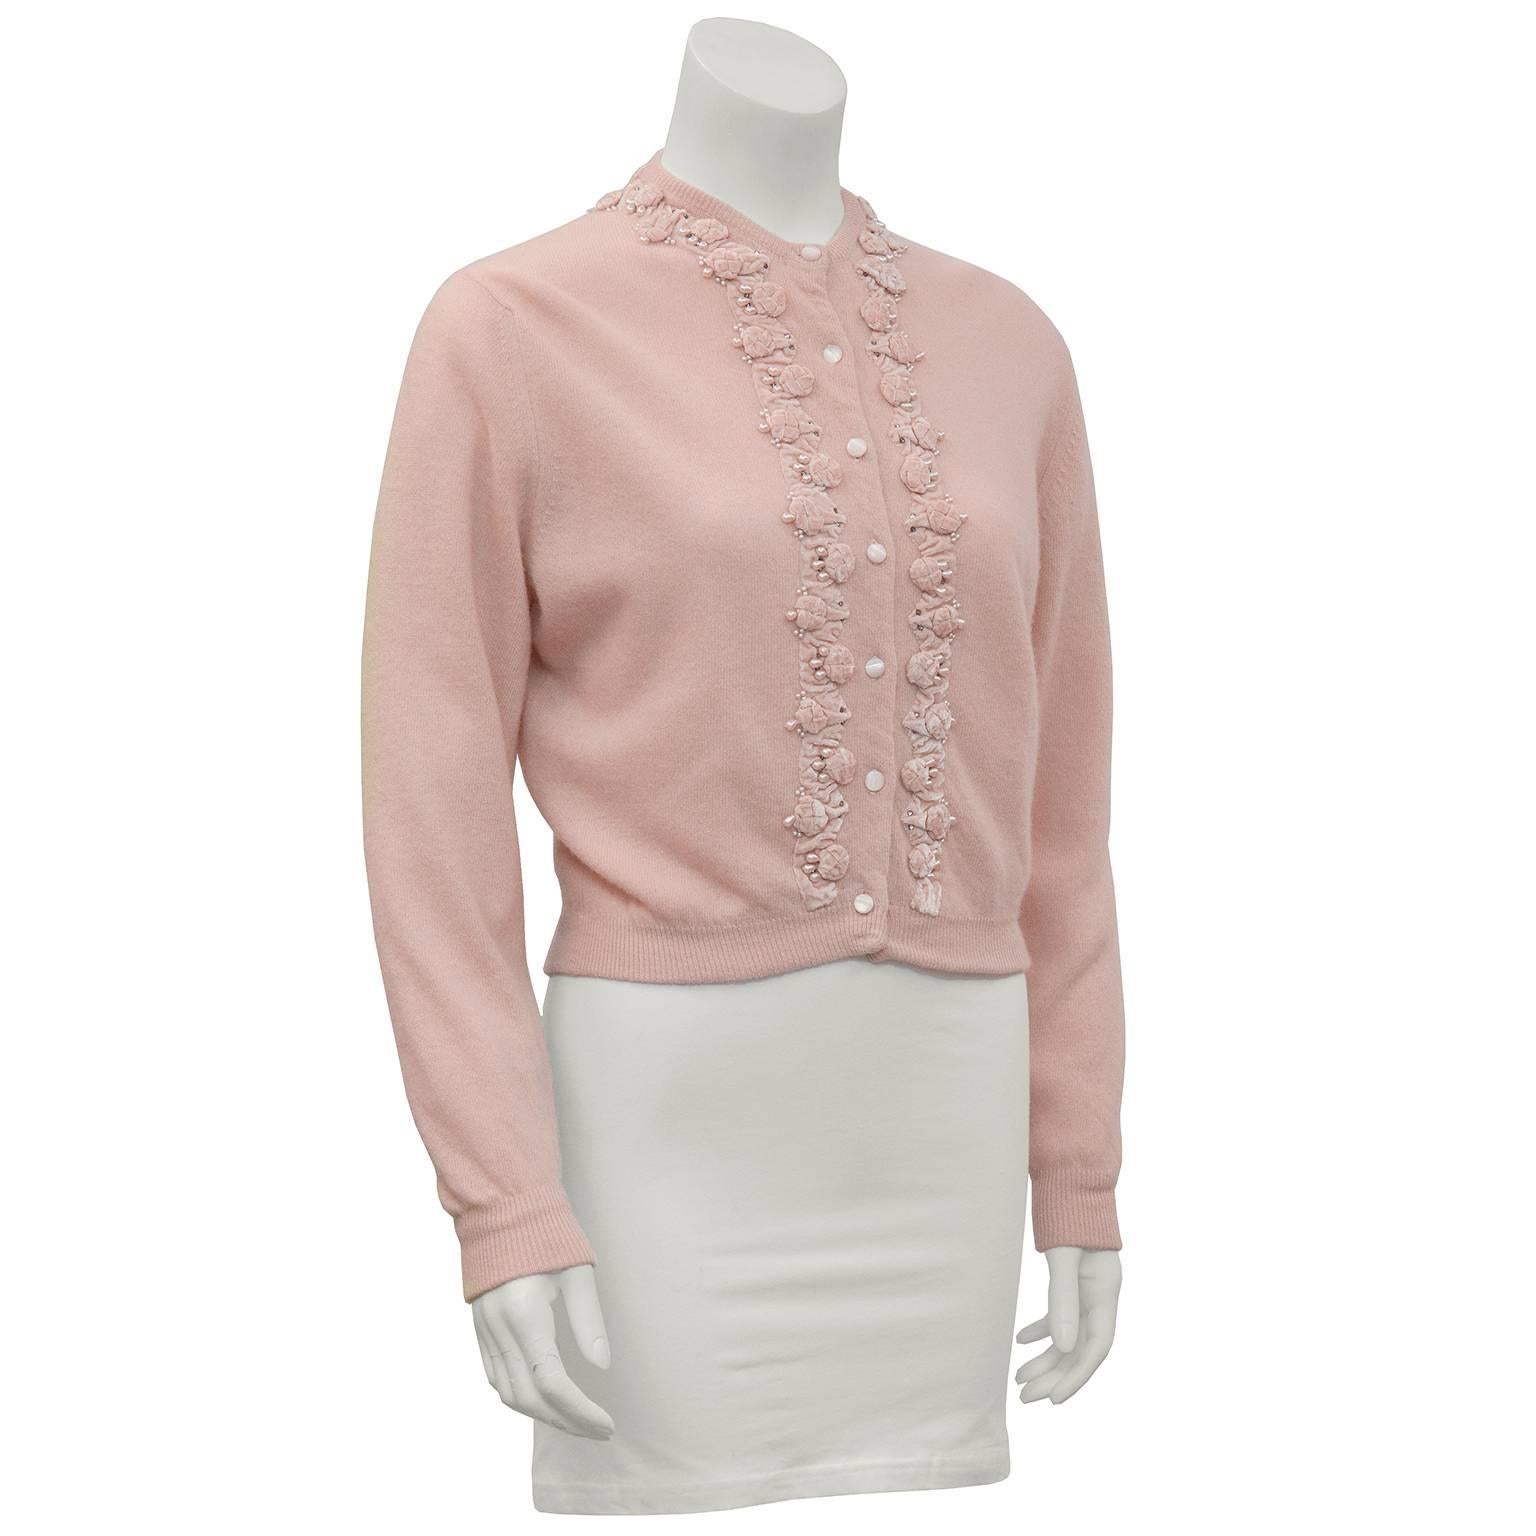 1950's pink cashmere cardigan with matching pink velvet ribbon and pearl motif sewn on the front and cuffs. Just like everyone's aunties used to wear back in the day! Lined with silk, mother-of- pearl buttons, Drape over shoulders and a rocker Tee.